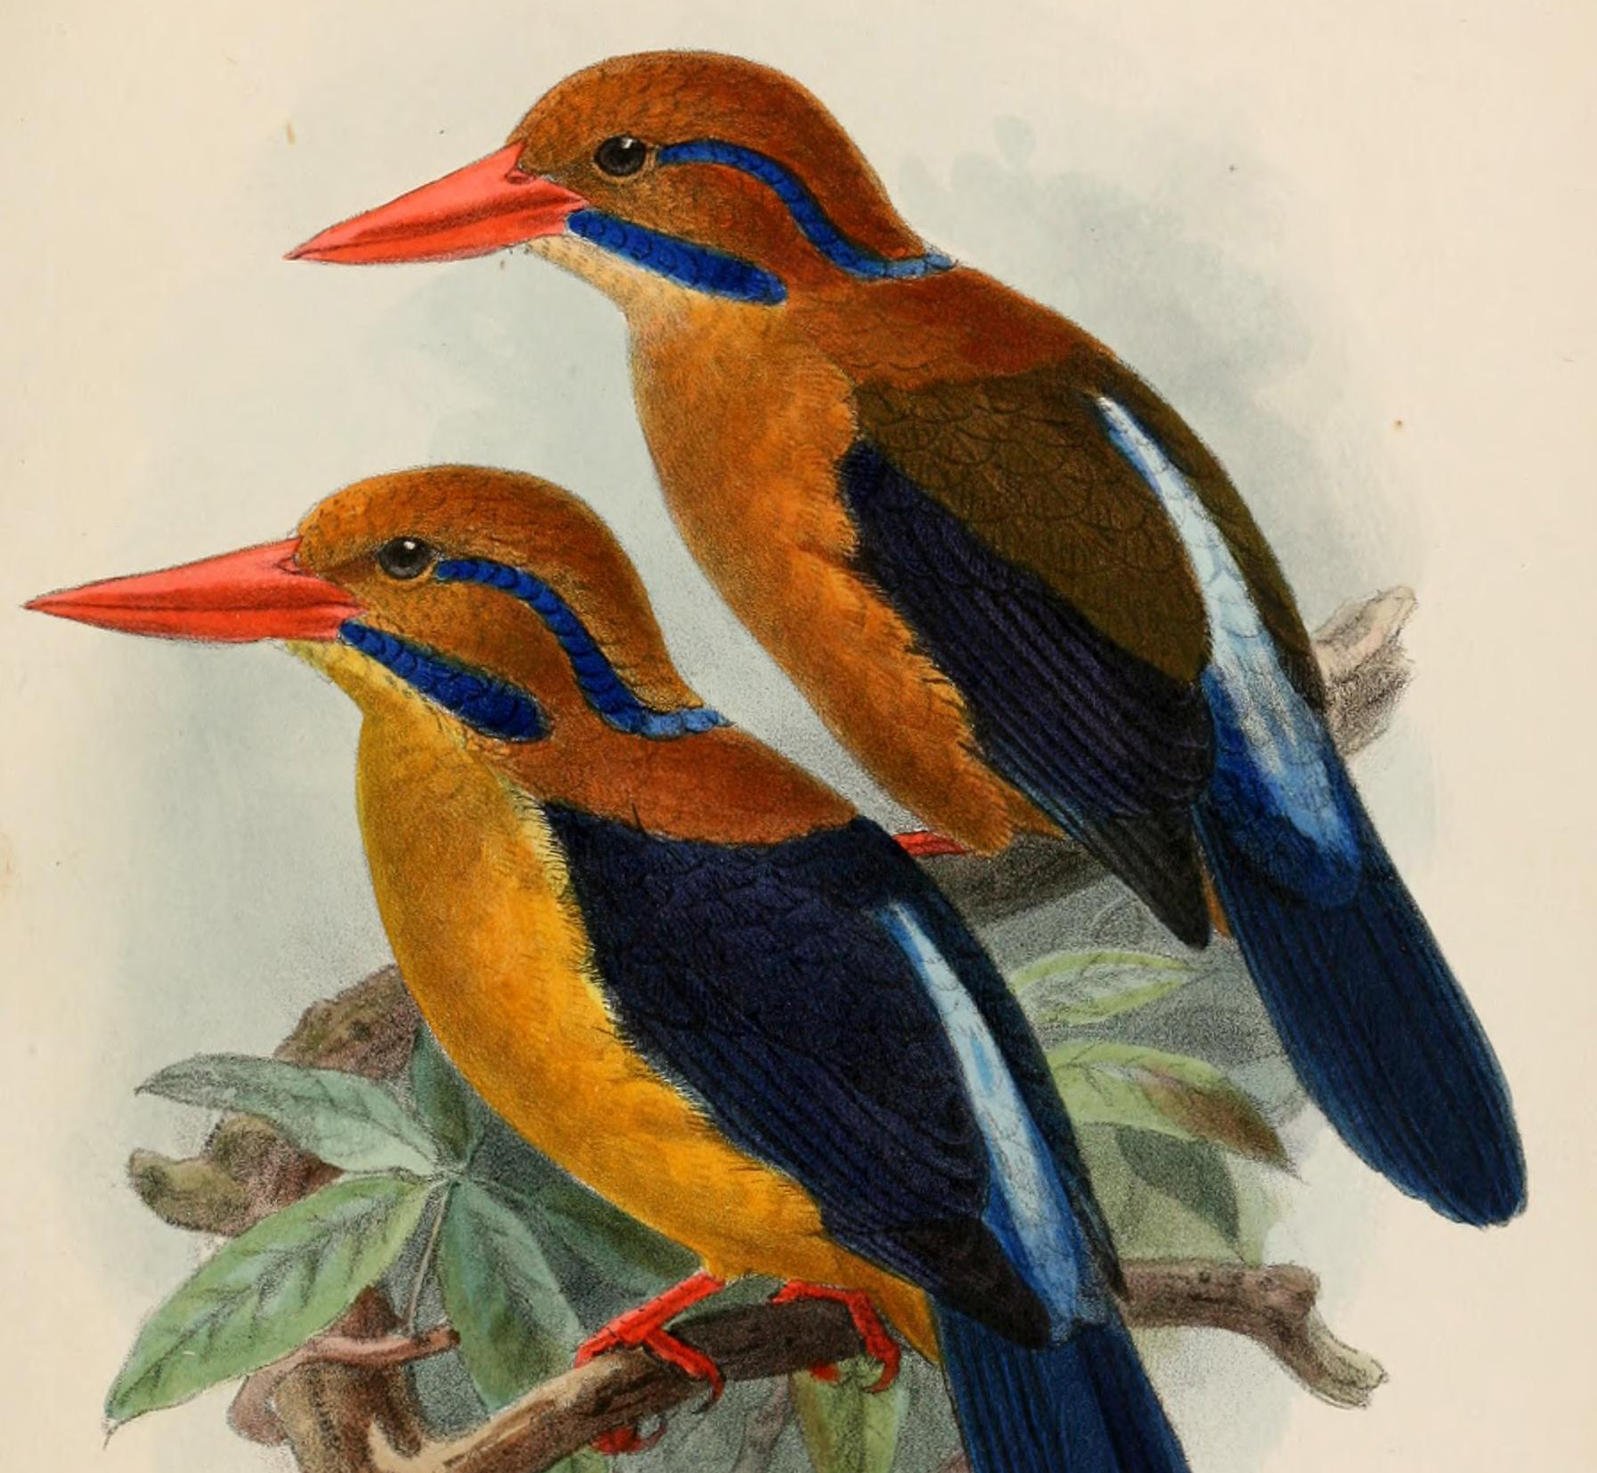 J.G. Keulemans, print of the male and female of the Bougainville Moustached Kingfisher (1905), closely related to the recently spotted Guadalcanal Moustached Kingfisher.  Photo: J.G. Keulemans, Novitates Zoologicae.